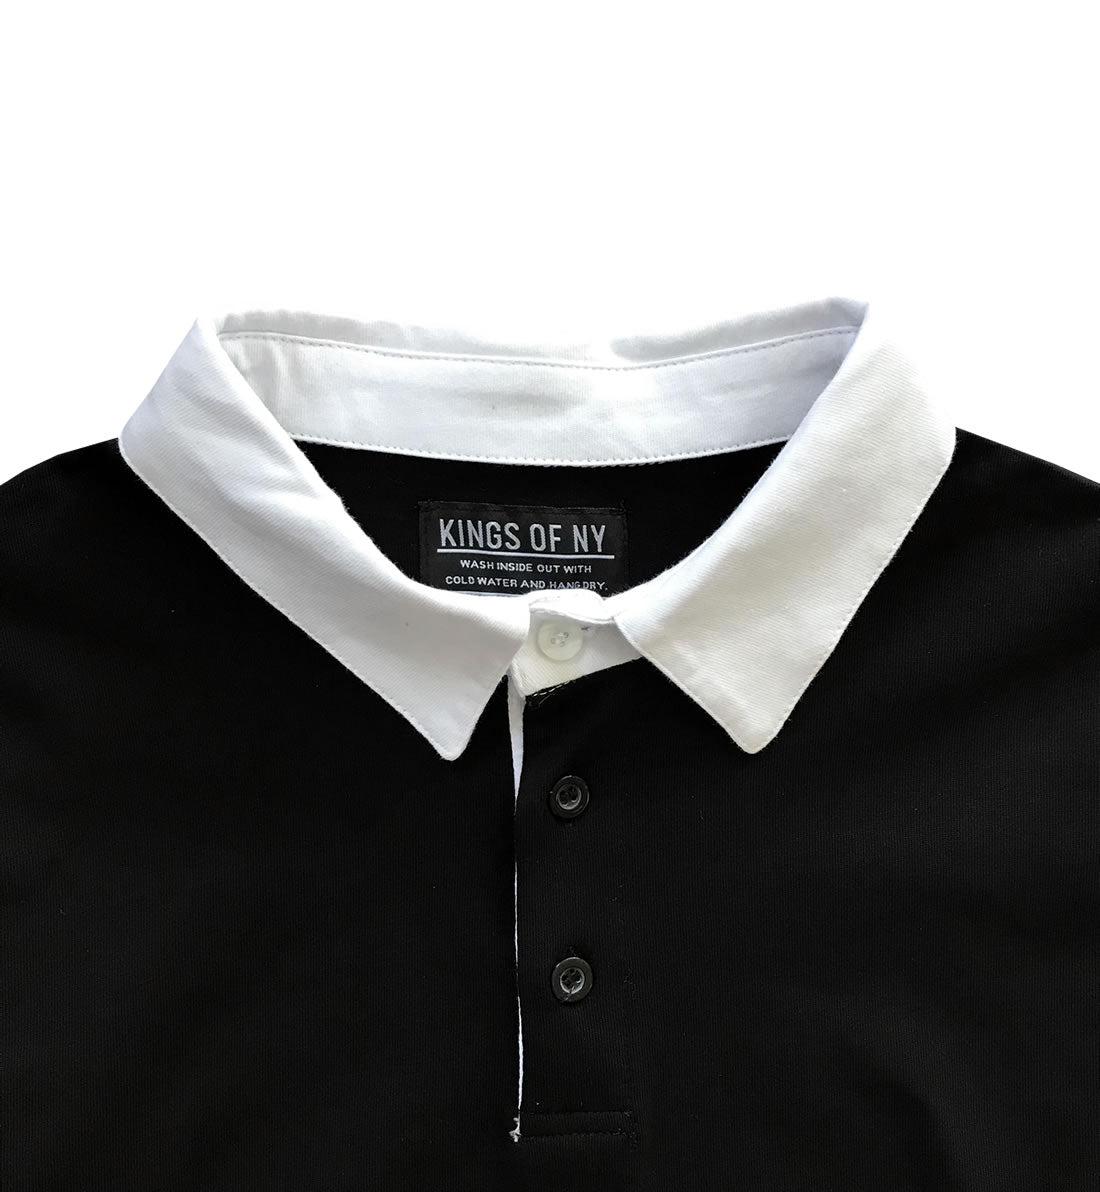 Solid Long Sleeve Cotton Collar with Logo Polo Shirt - Black-S